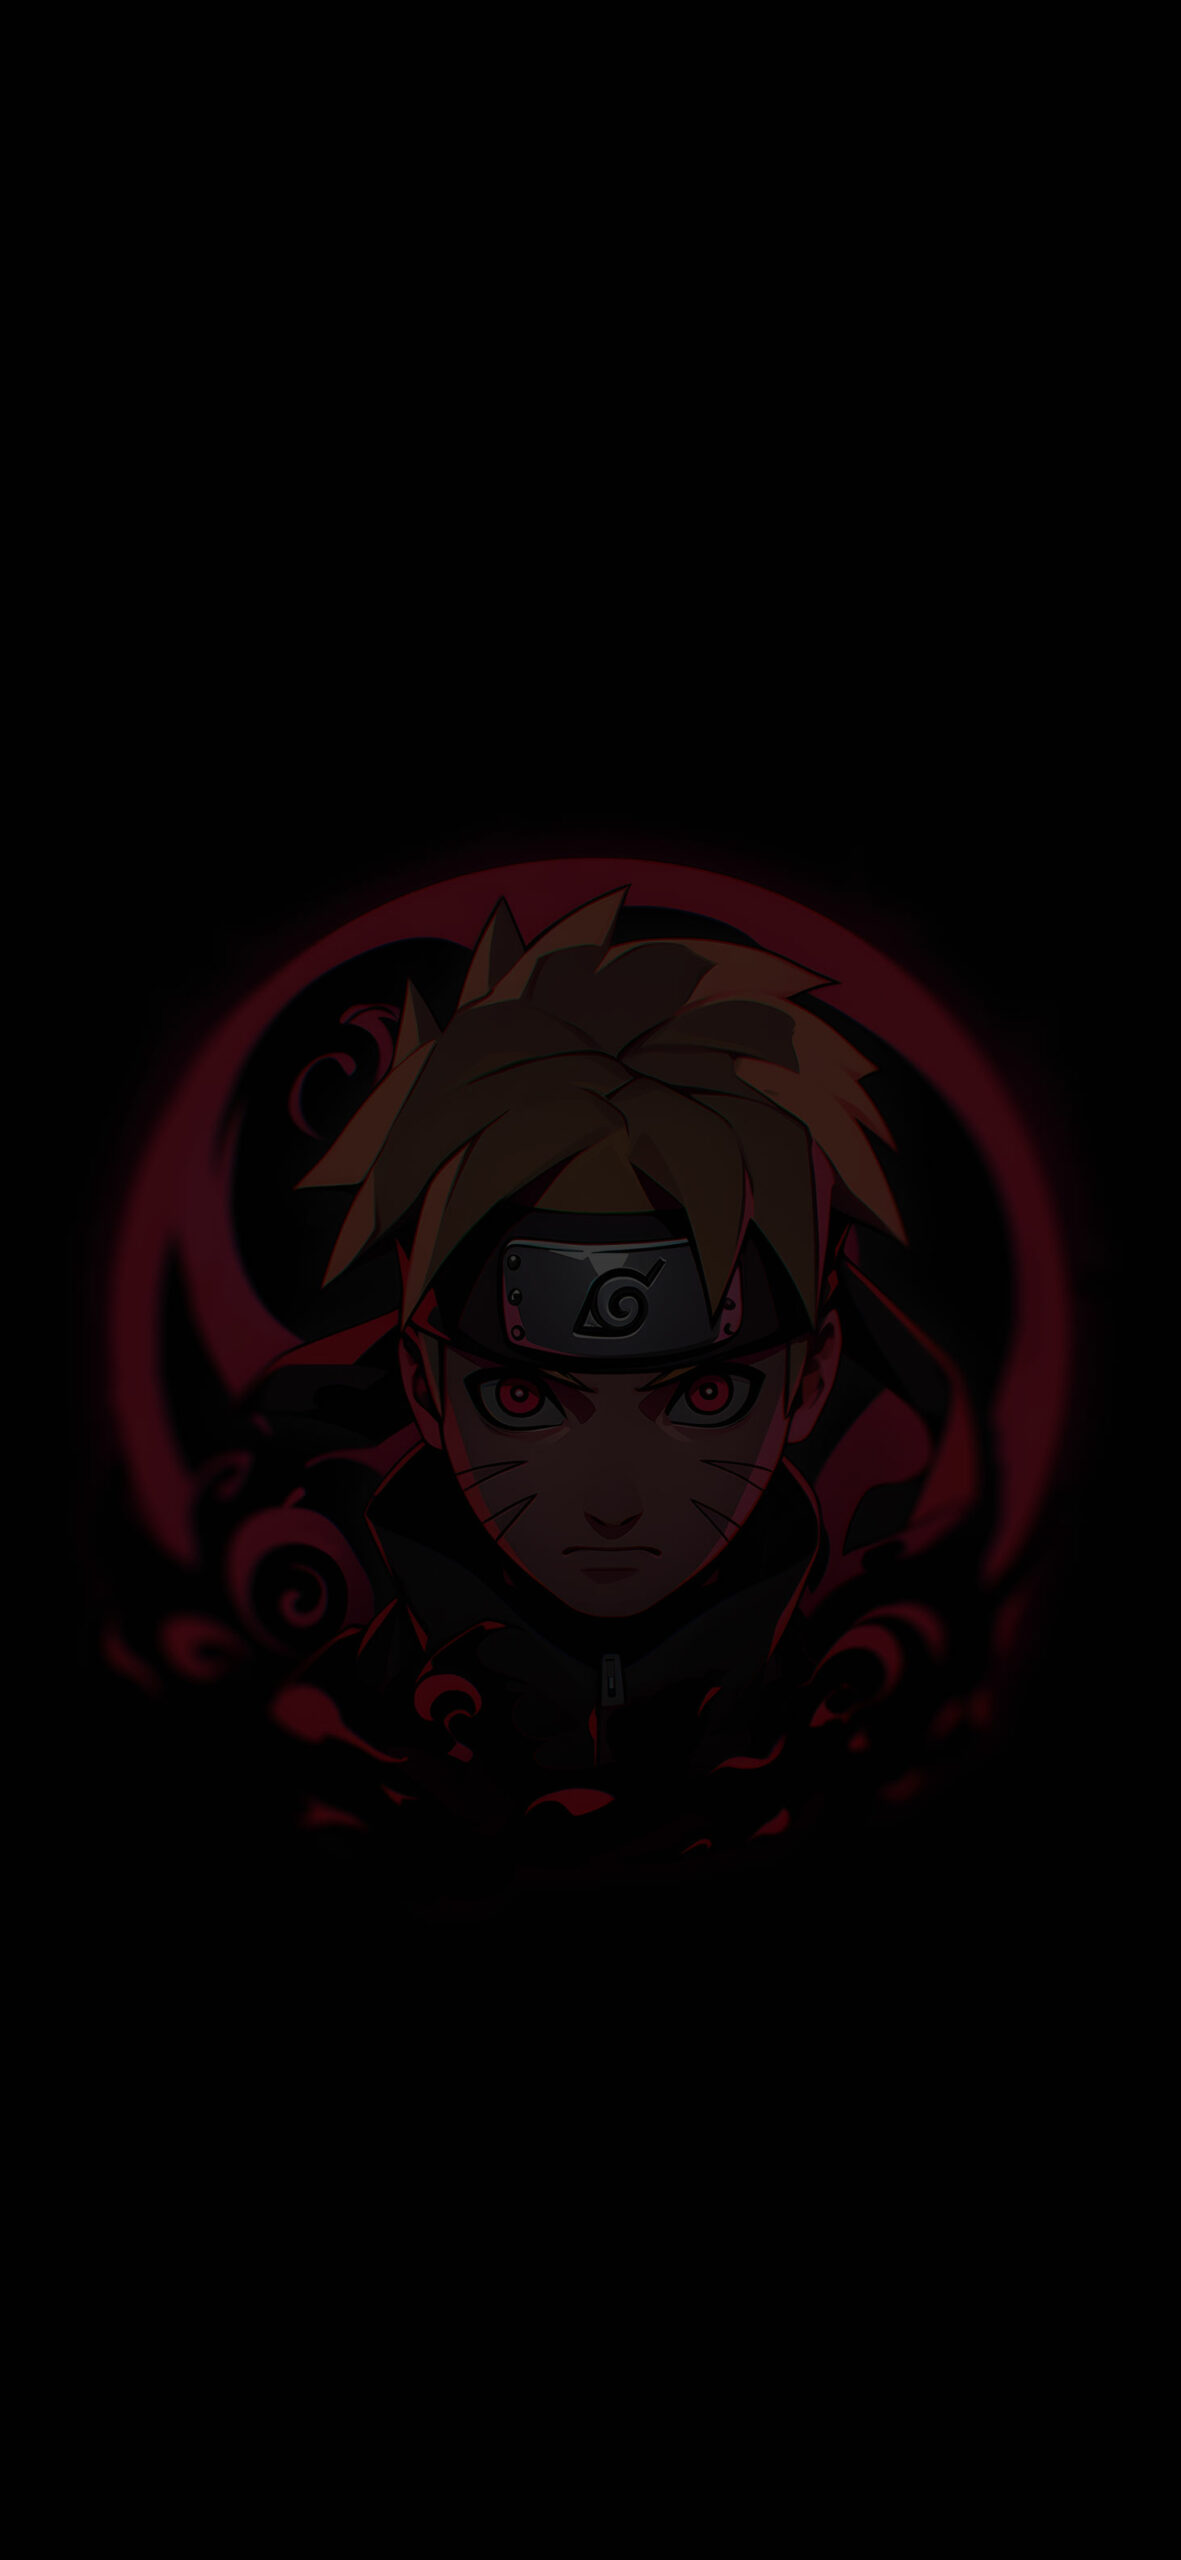 Determined Naruto with Red Eyes Wallpapers - Anime Wallpapers